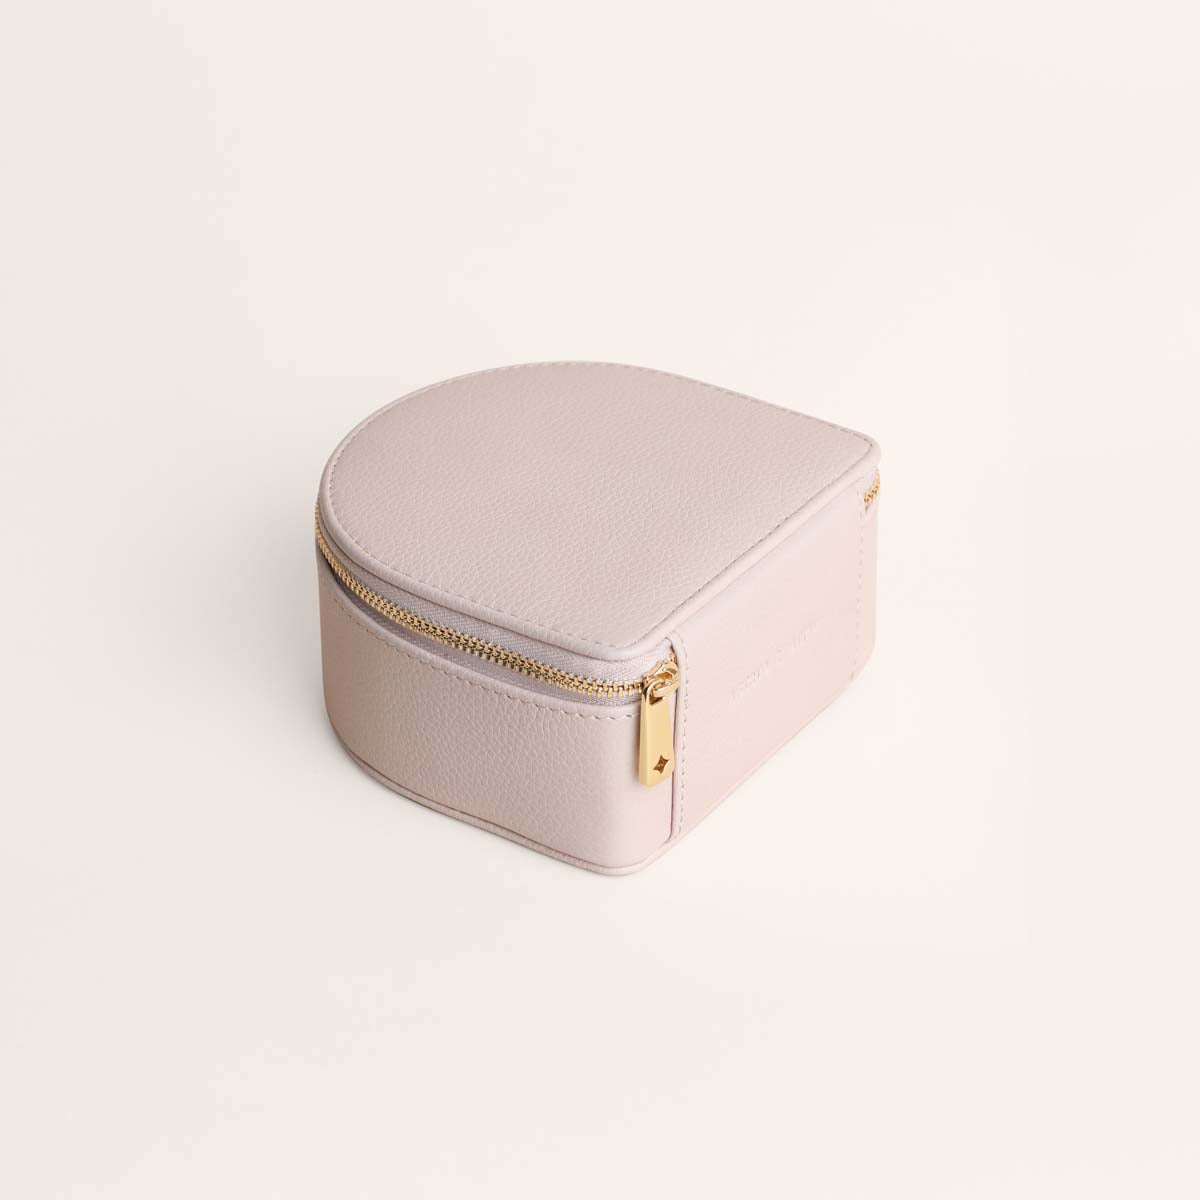 Leather Large Jewellery Box in Fawn Sand